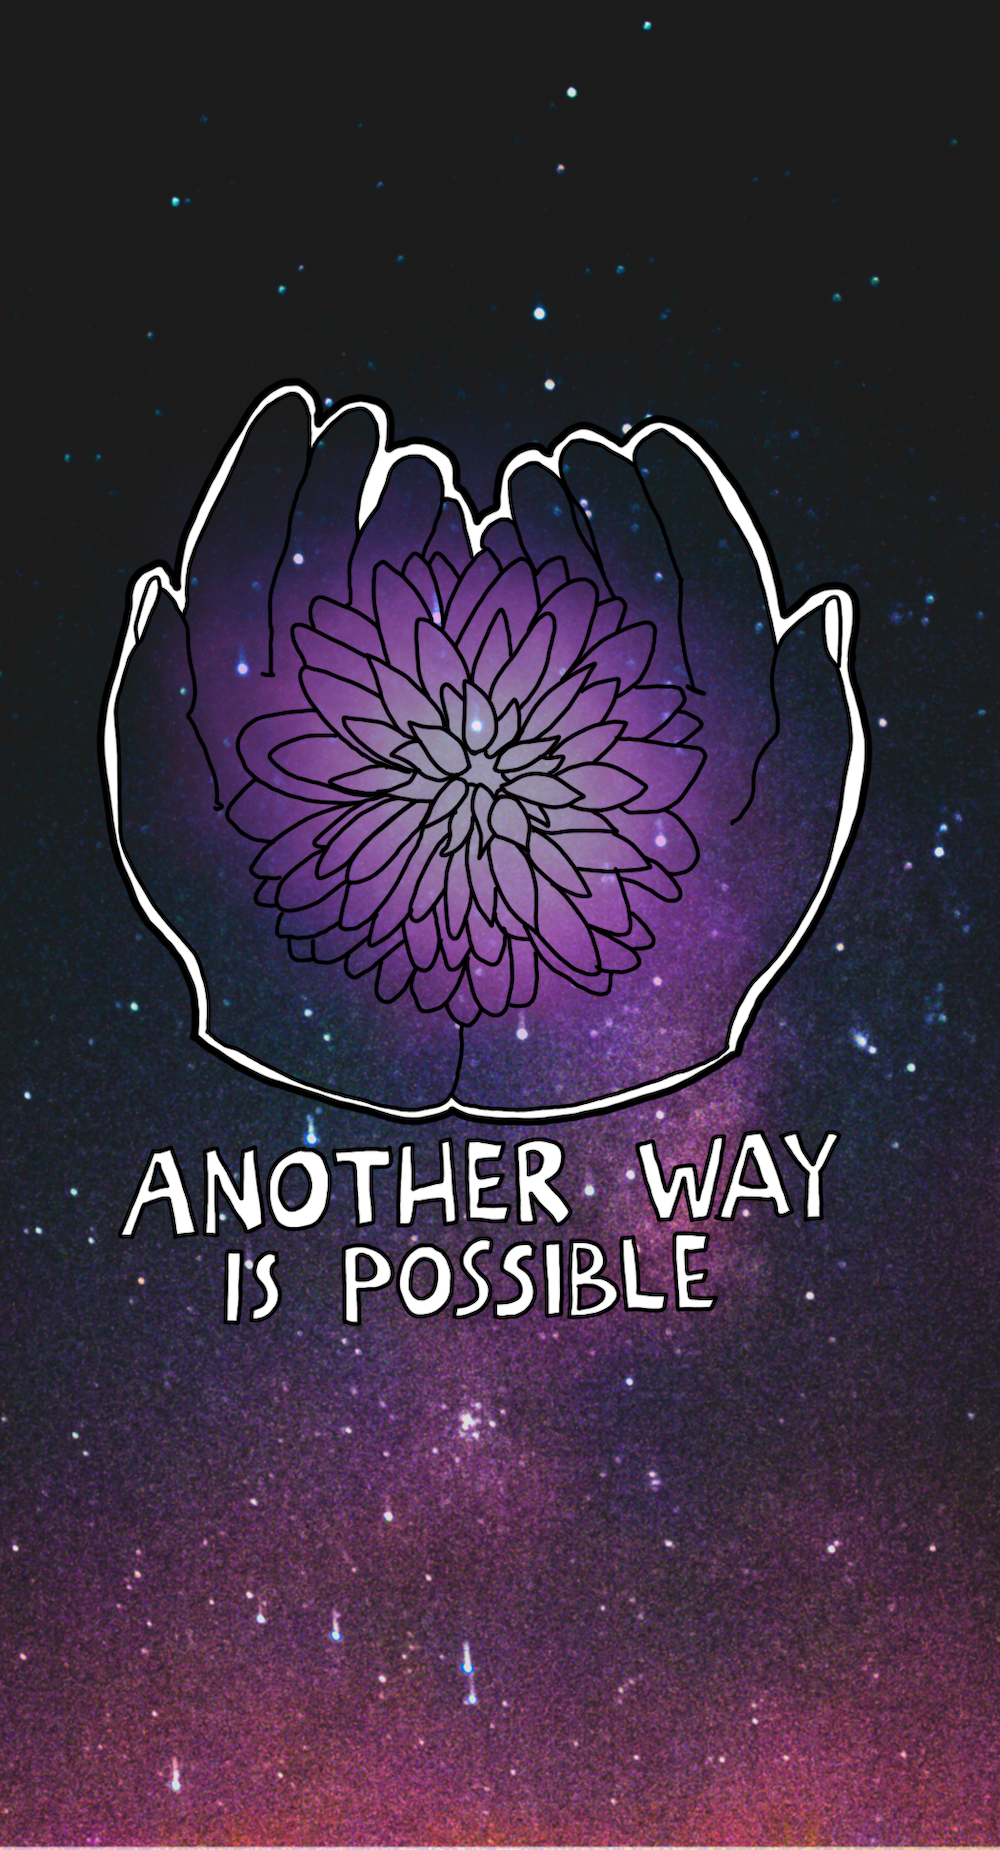 Another way is possible. Another world is possible.